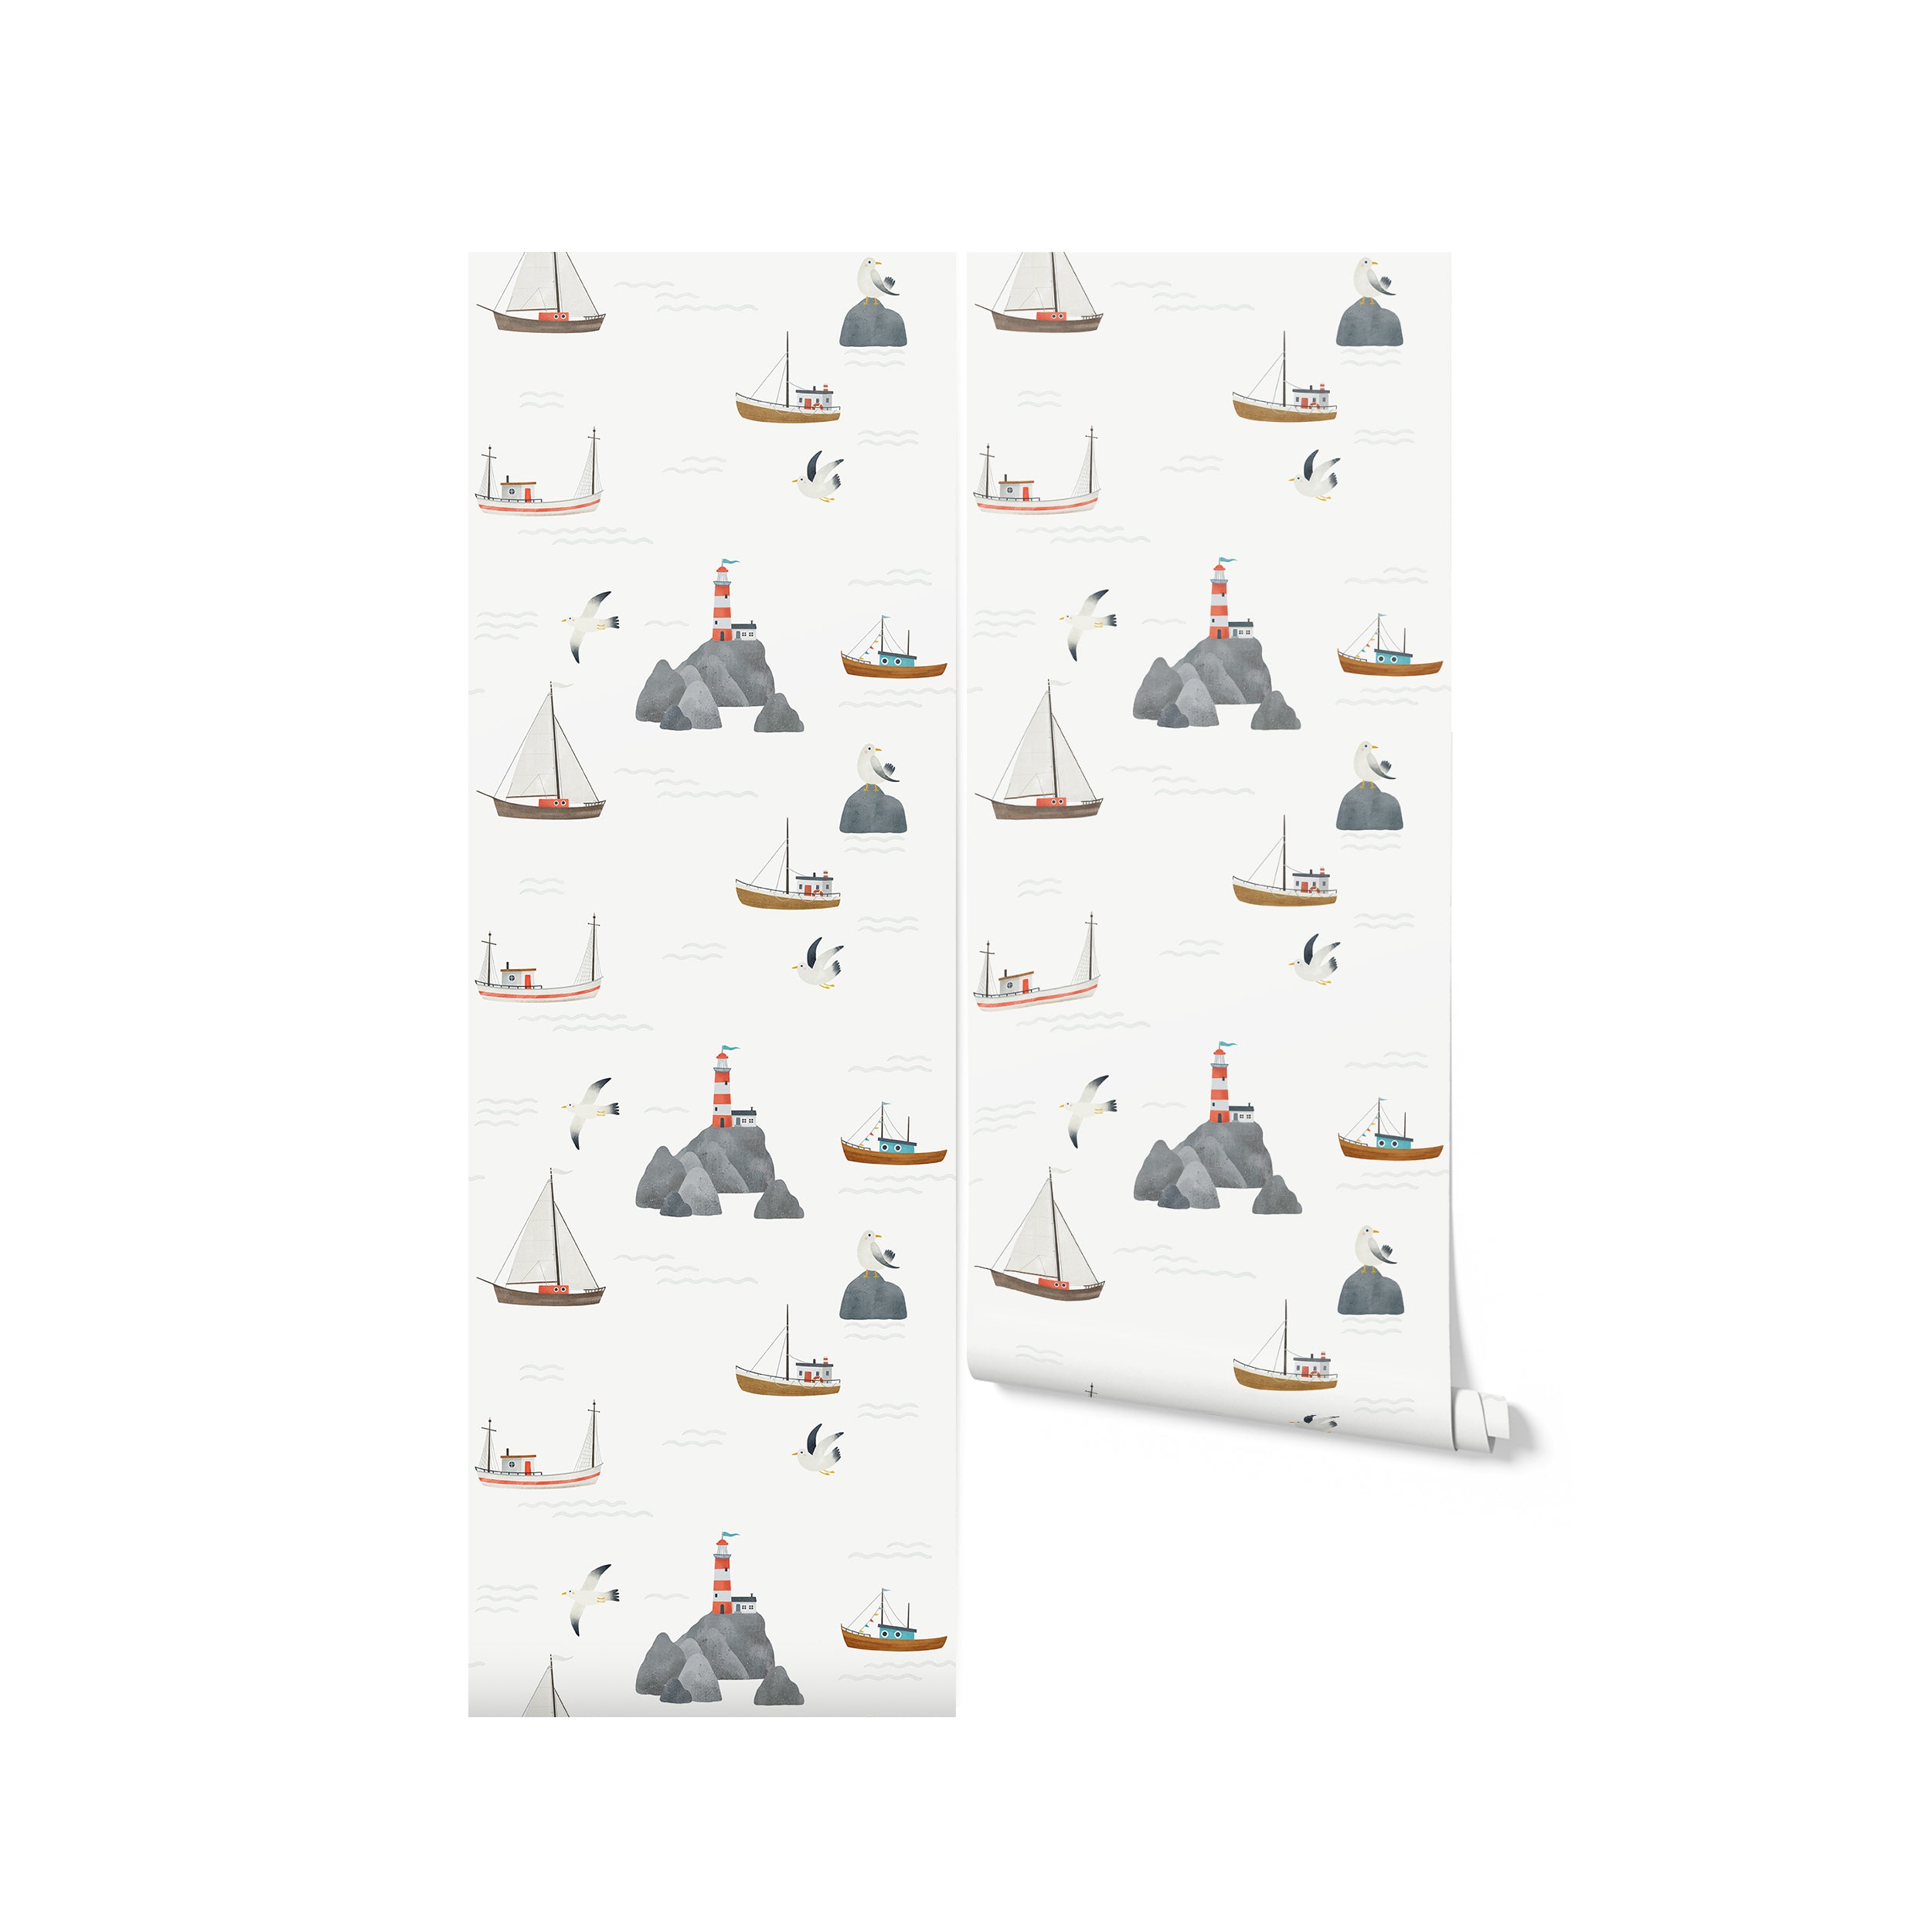 A roll of "By the Sea - Sailboat and Lighthouse Wallpaper" displayed unrolled, highlighting the detailed artwork of maritime scenes with sailboats, lighthouses, and sea birds. This image focuses on the wallpaper's potential to transform any room with its soothing nautical theme.